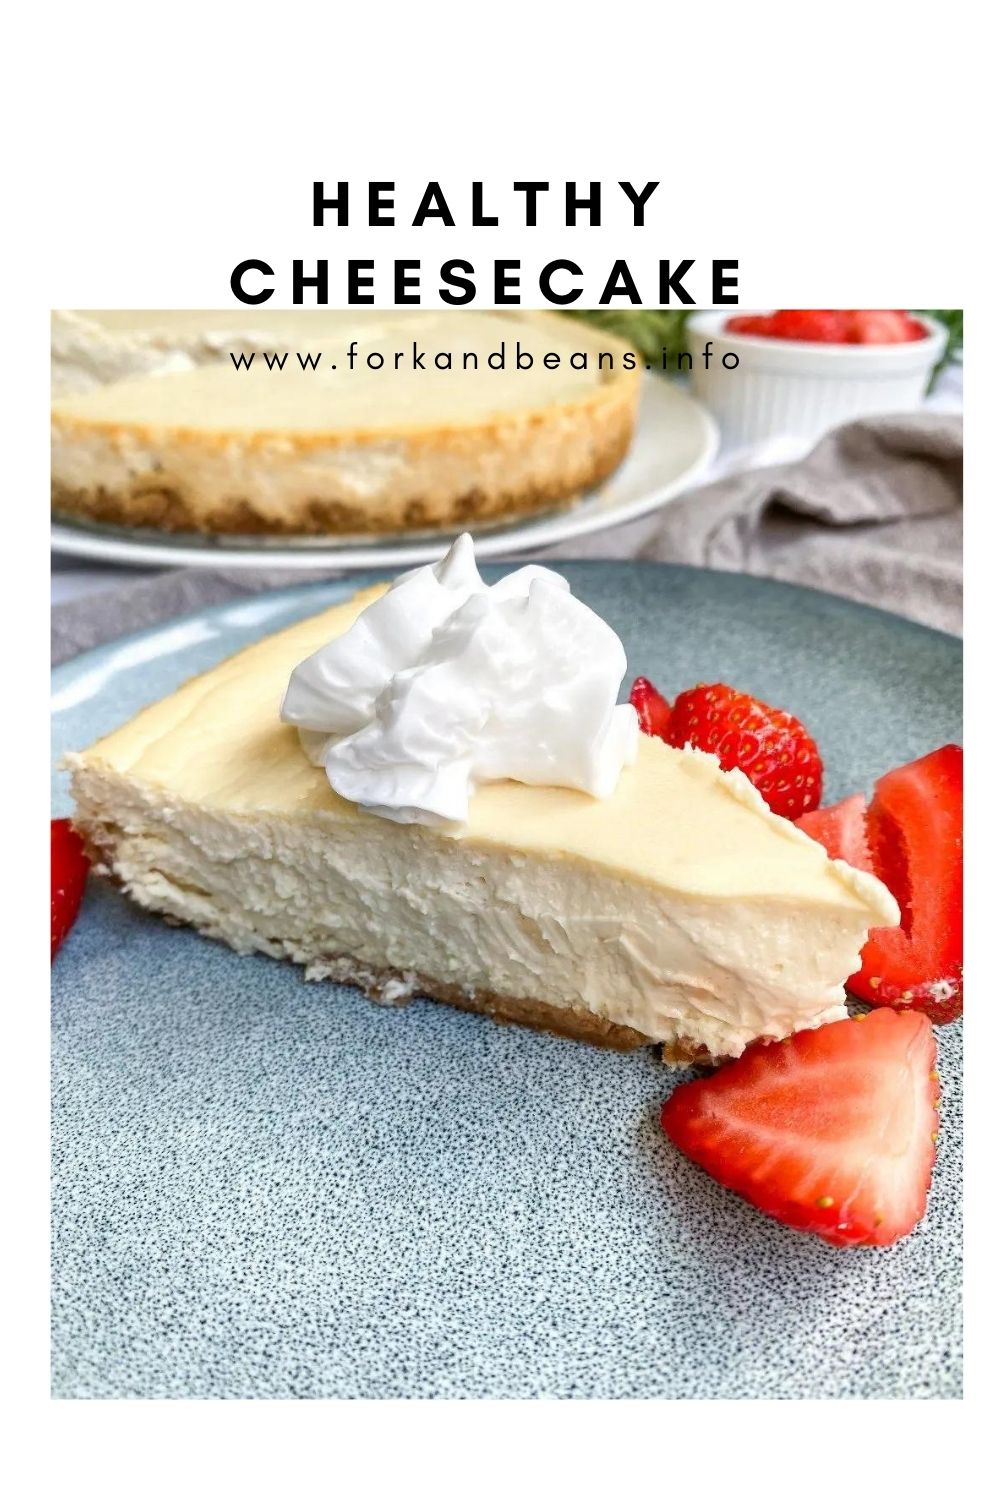 THE BEST HEALTHY CHEESECAKE RECIPE